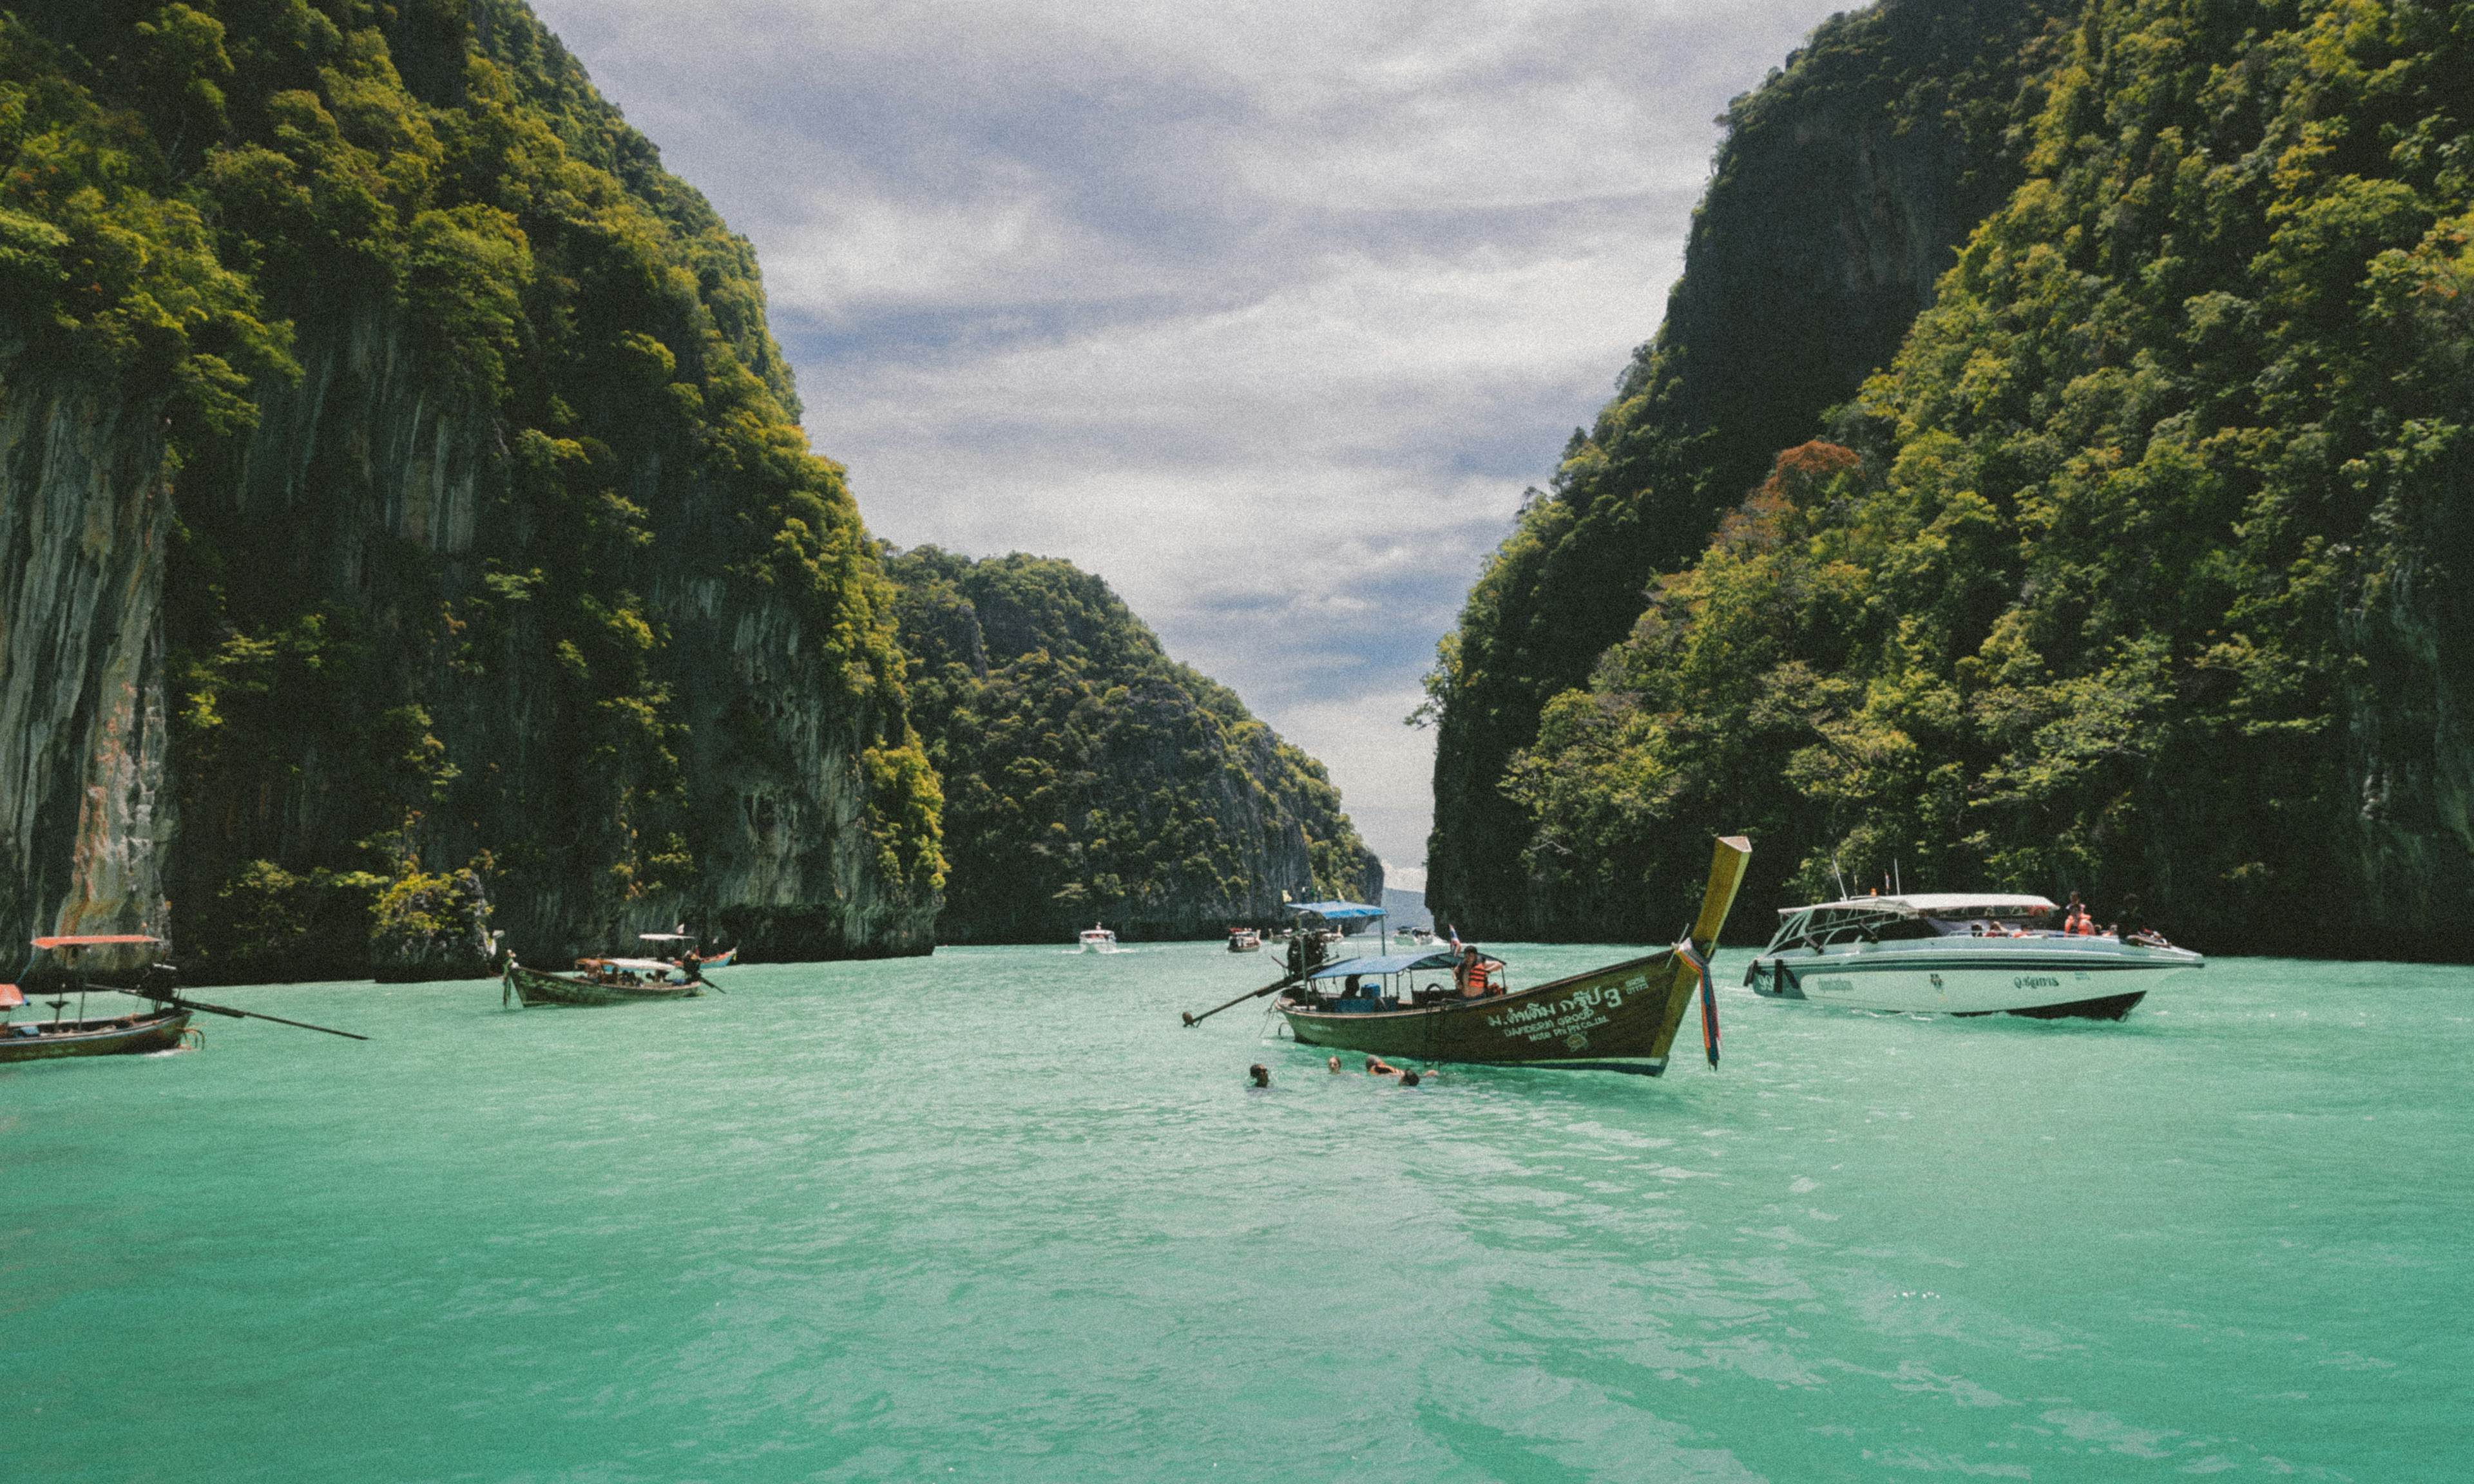 The blue waters of the Vietnamese sea surrounded by green mountains with boats bobbing about 